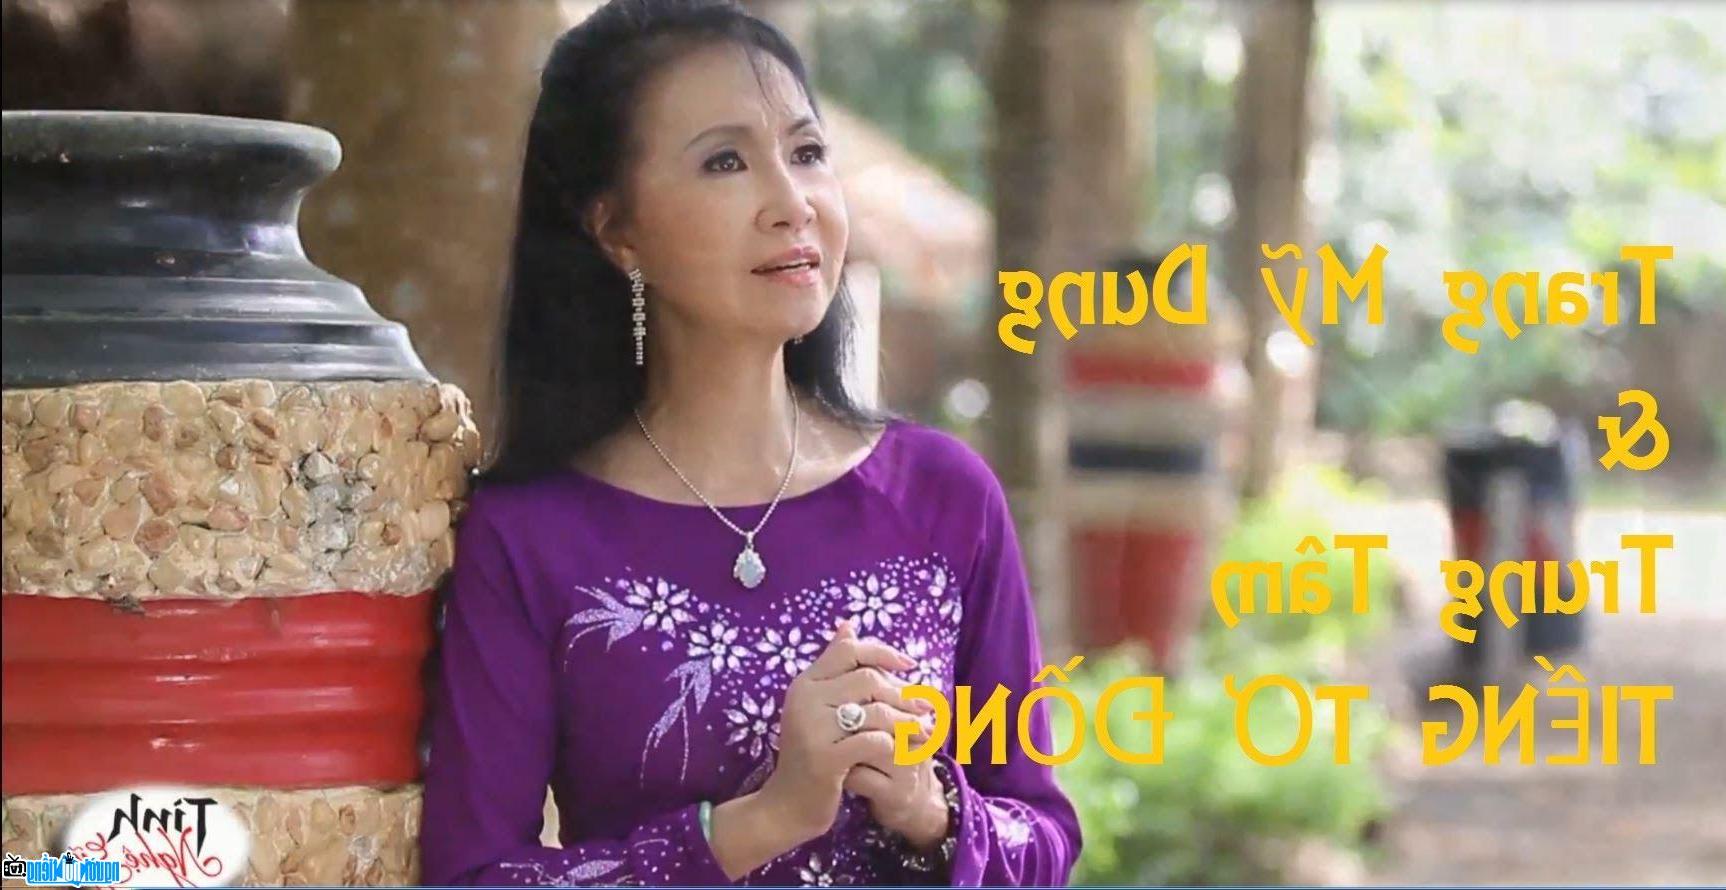  Latest pictures of Singer Trang My Dung